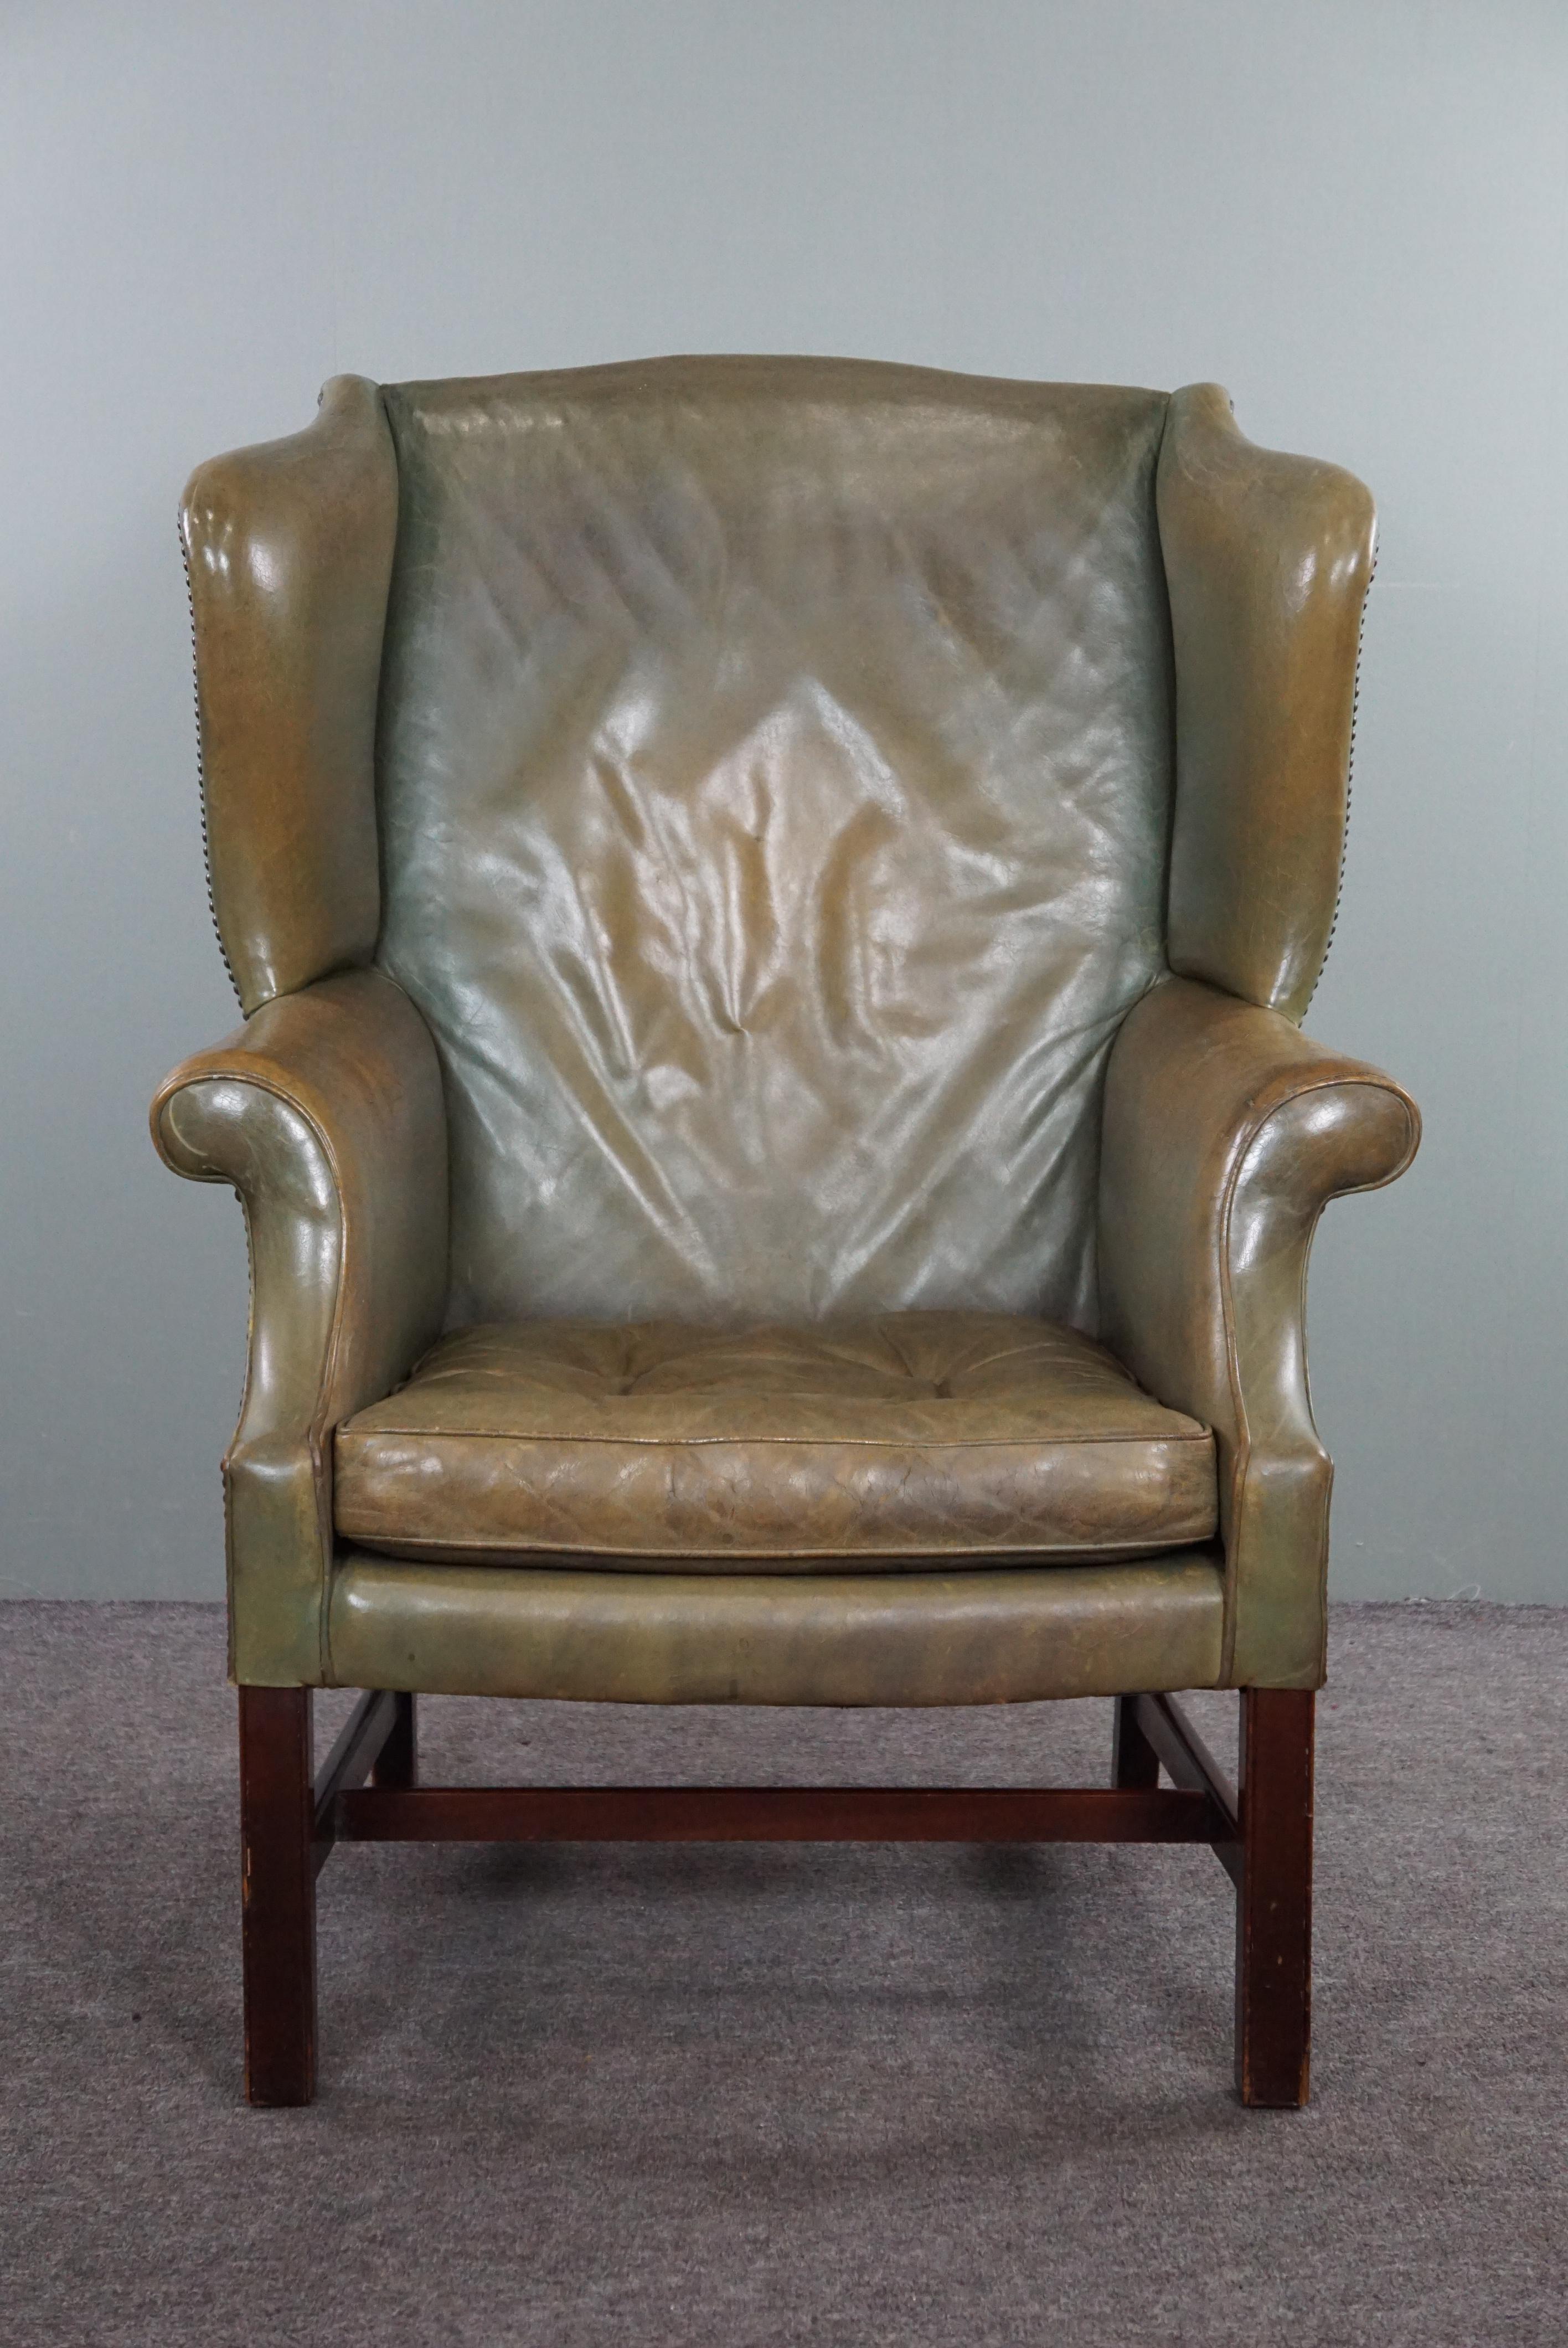 Offered is this green wing chair with character and comfort.

Do you have a corner in your home where this wing chair, with its beautiful green color, comes into its own? This armchair is perfect as a reading chair, or for relaxing while drinking a